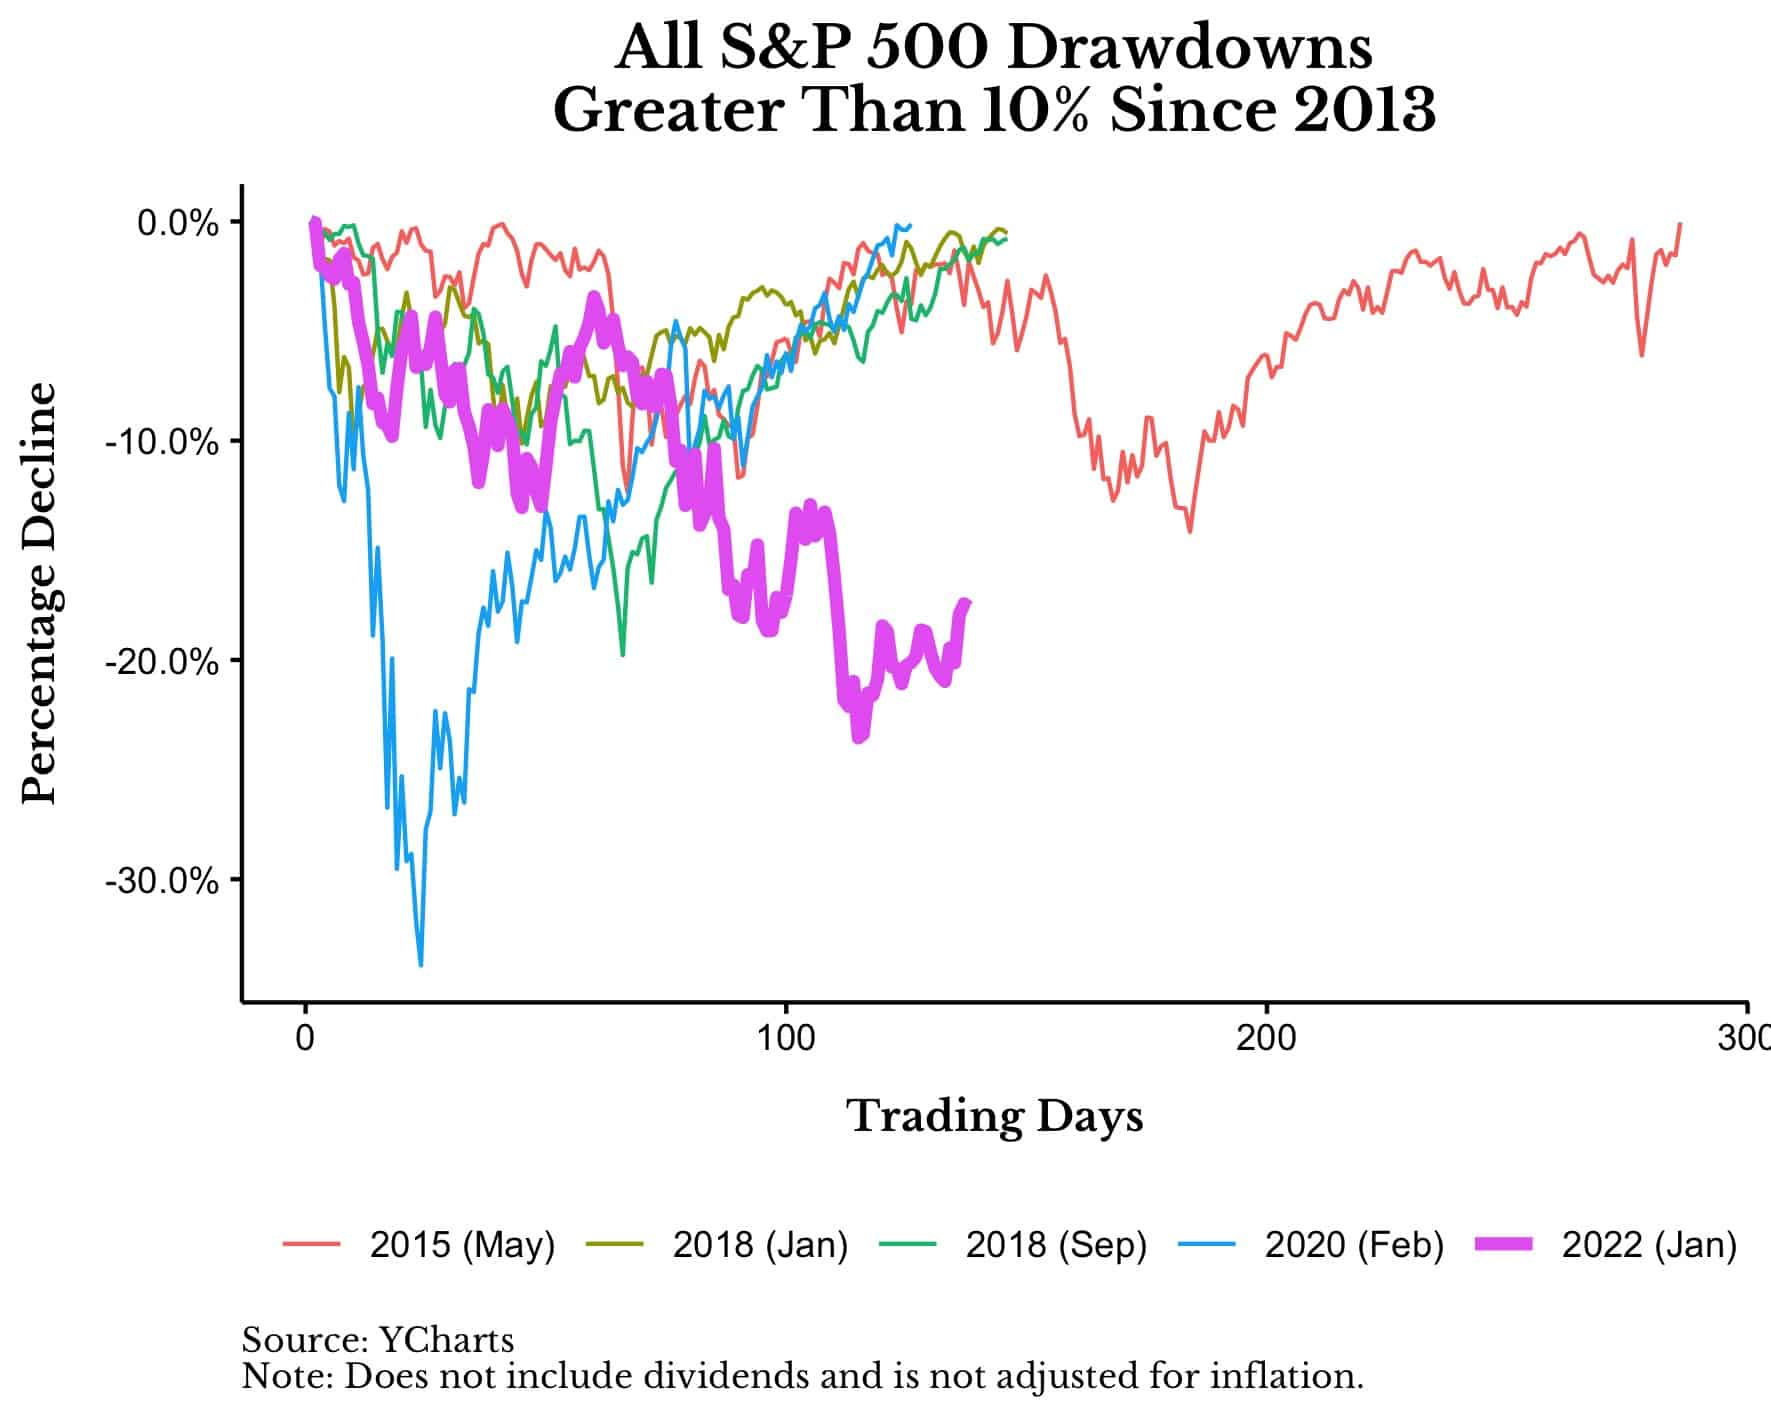 All S&P 500 drawdowns greater than 10% since 2013